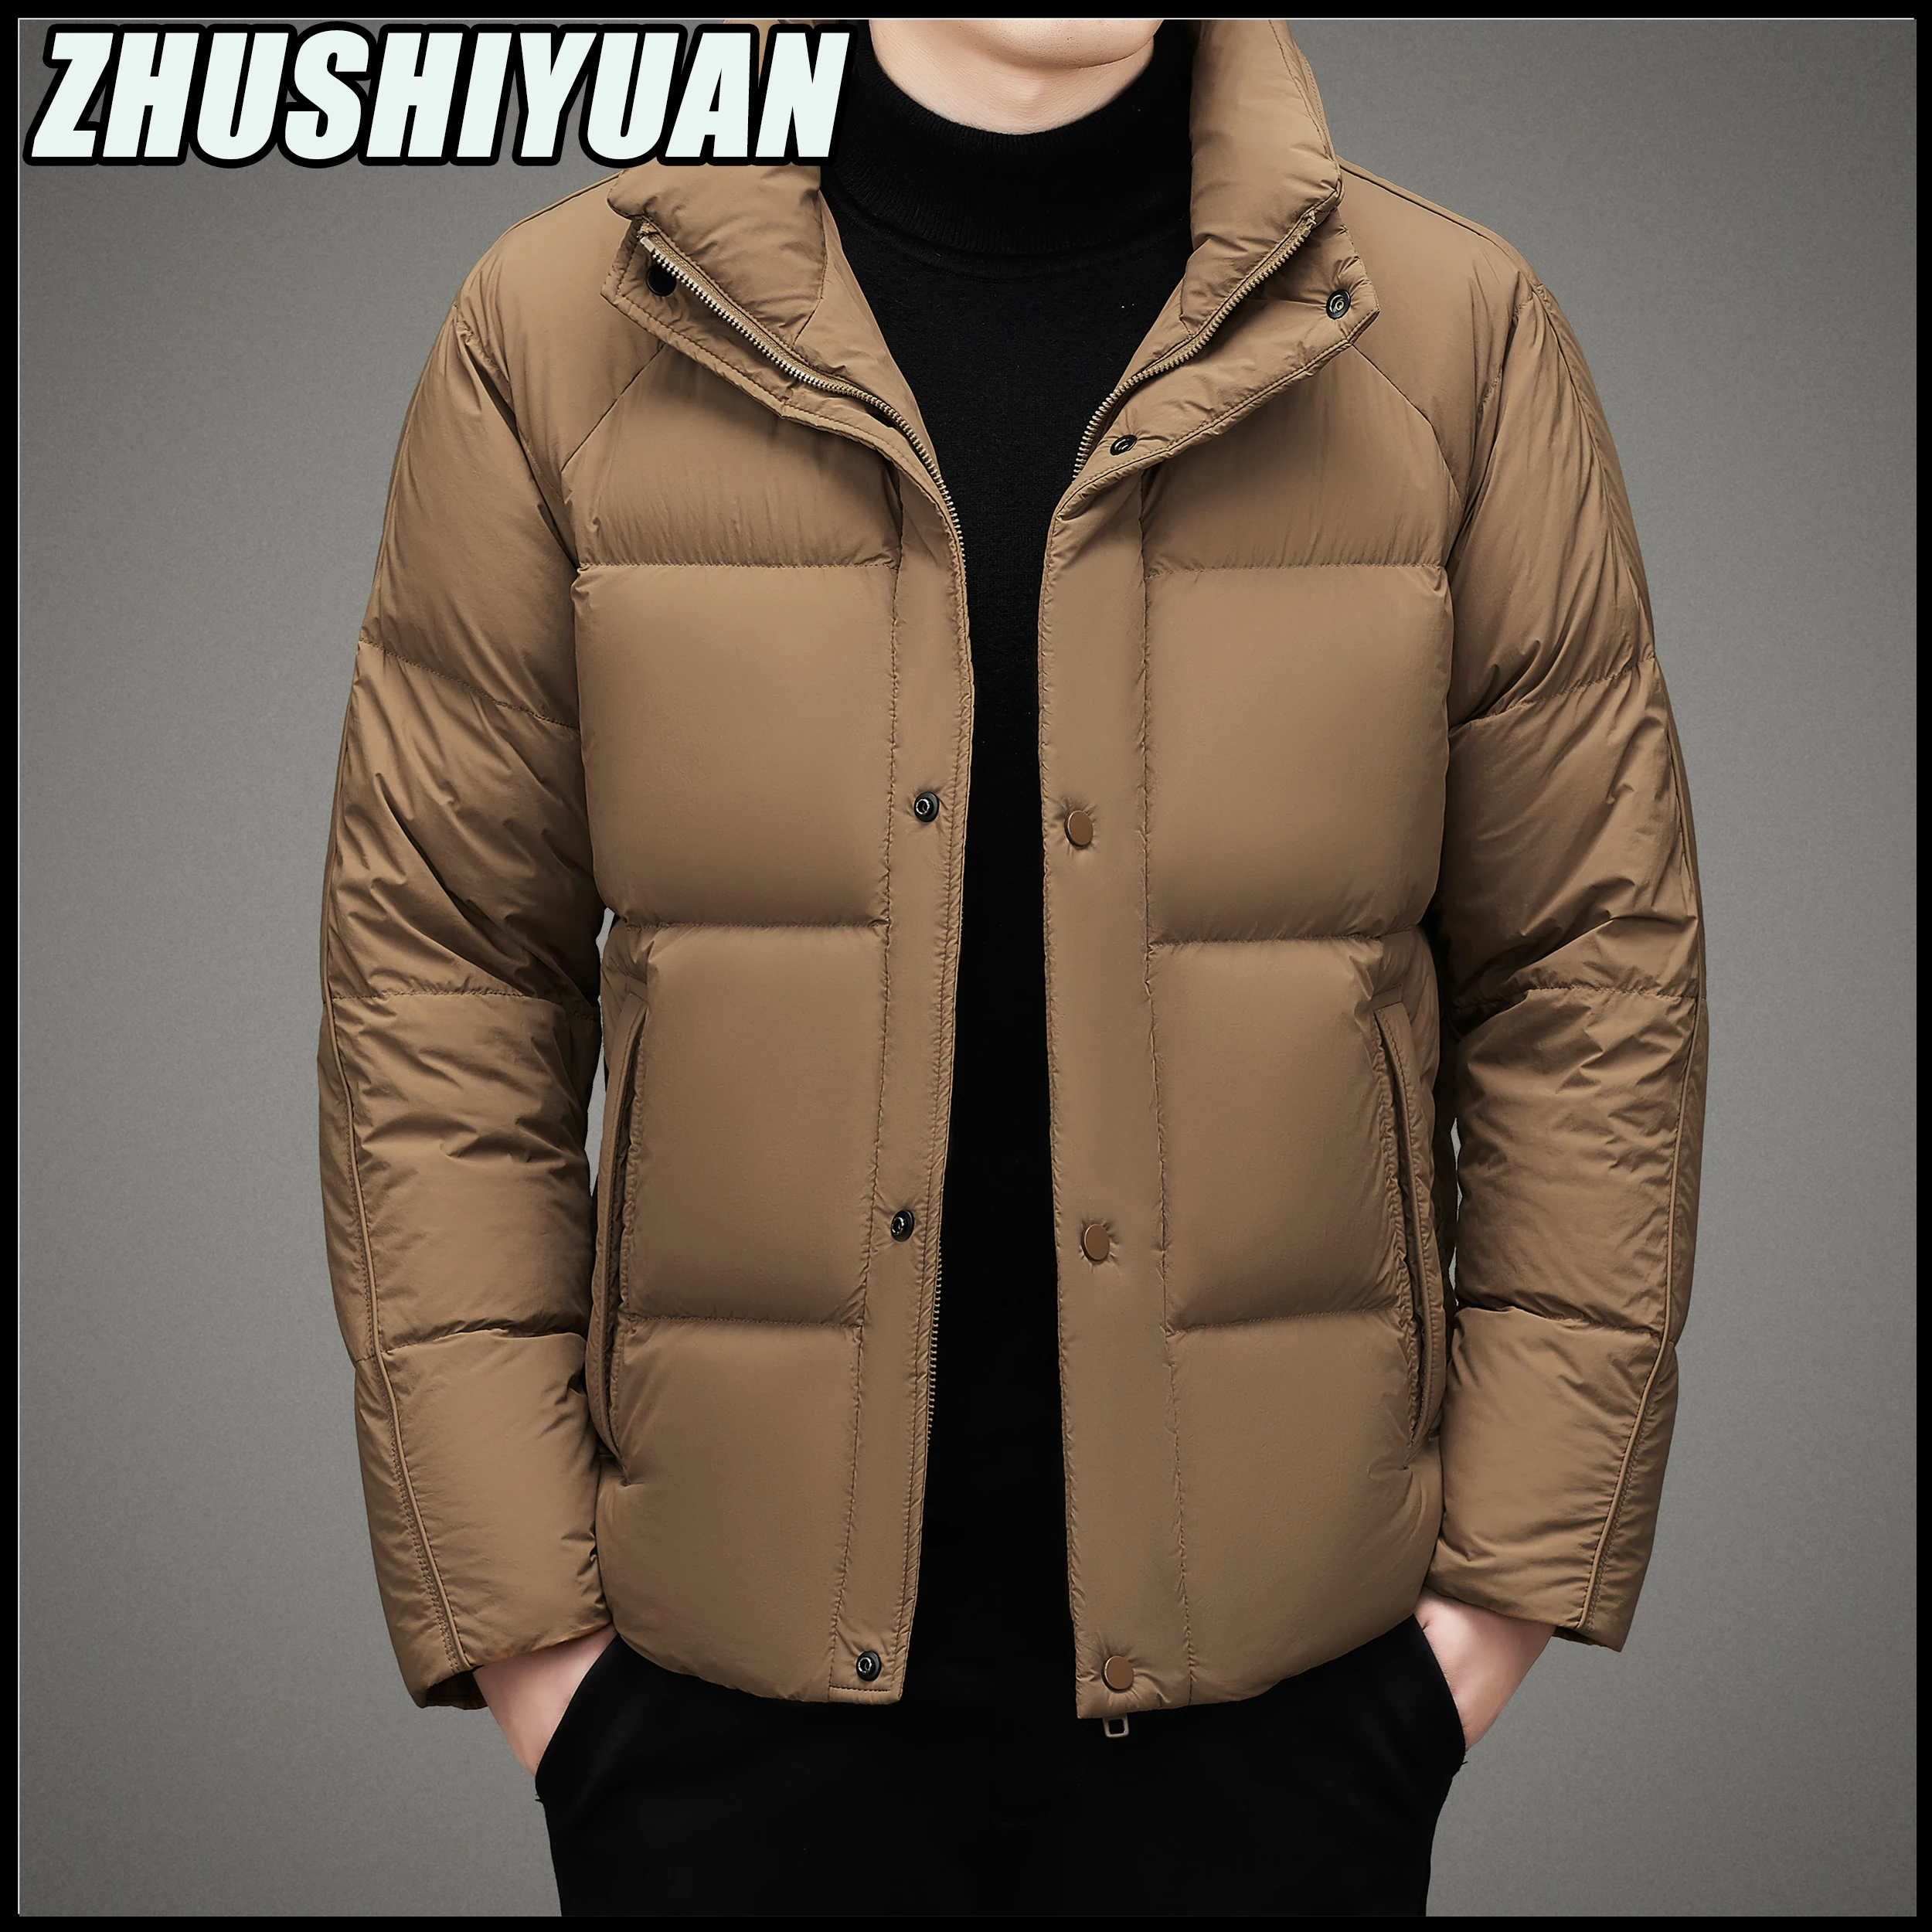 Men Winter Parkas Fashion Solid Jacket Thicken Warm Puffer Jackets Men's Clothing Ropa Hombre Jaqueta Masculina Doudoune Homme